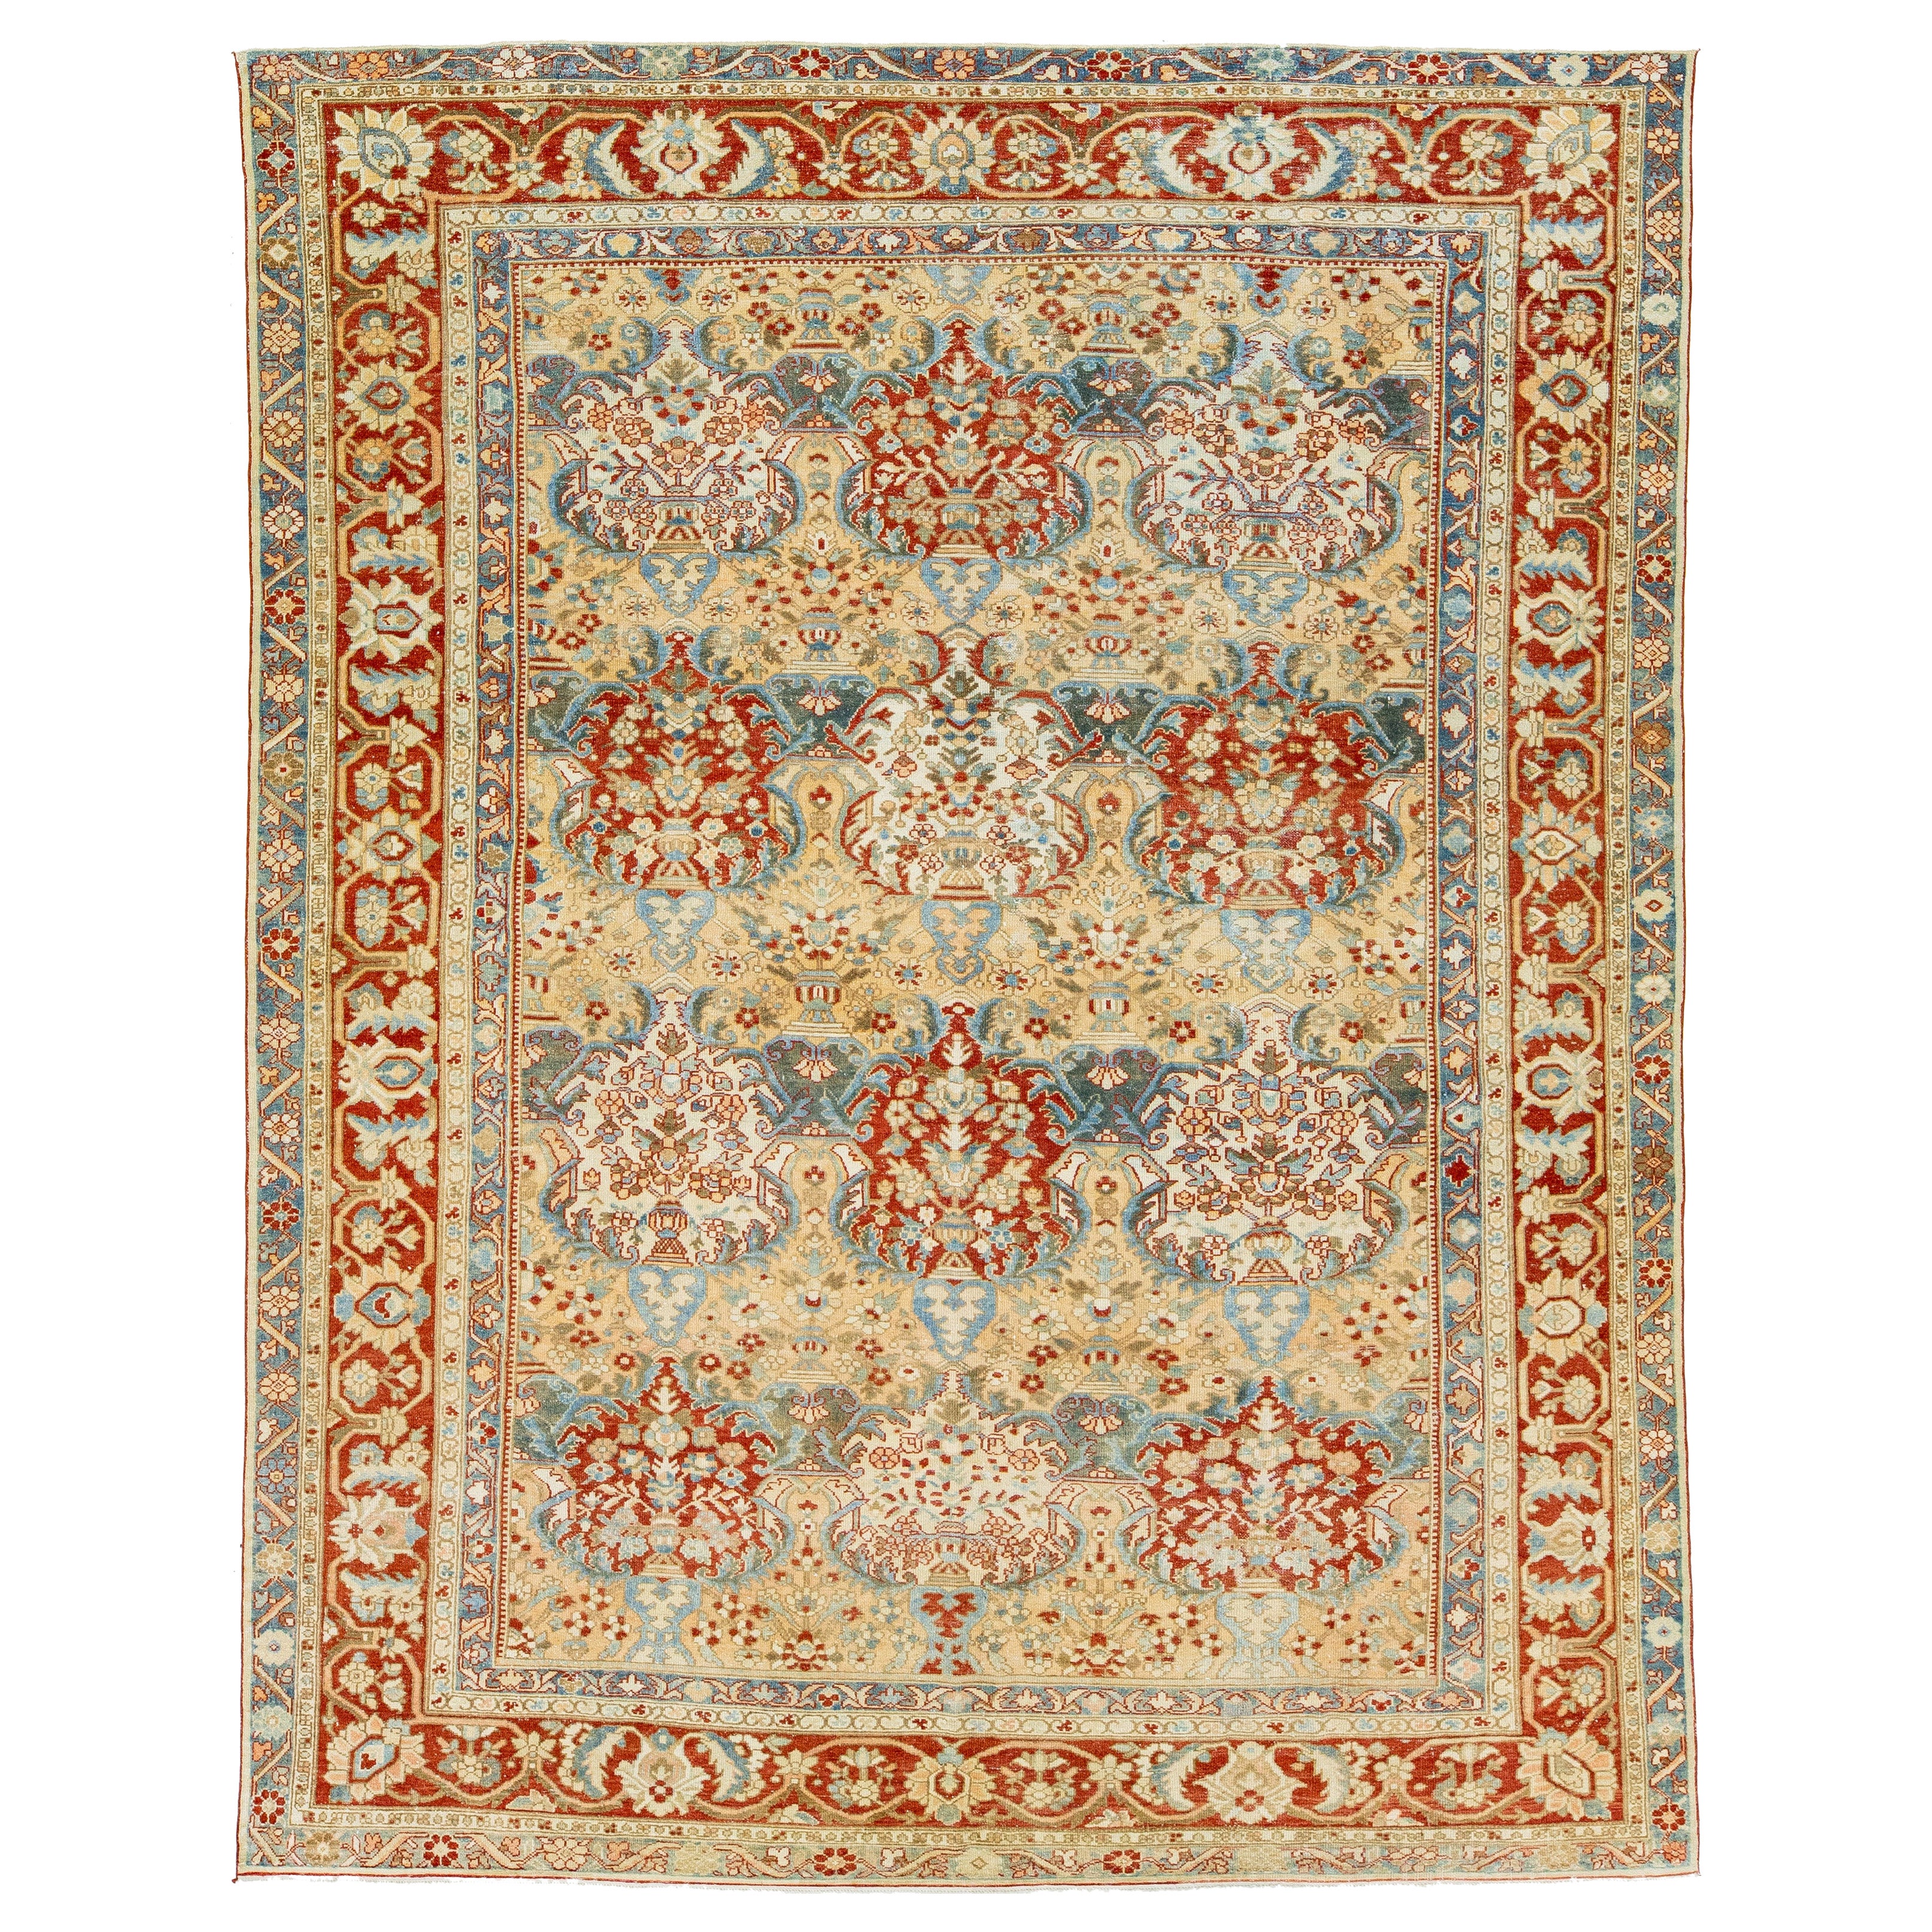 1920s Antique Persian Bakhtiari Wool Rug with a Tan Color and Allover Pattern